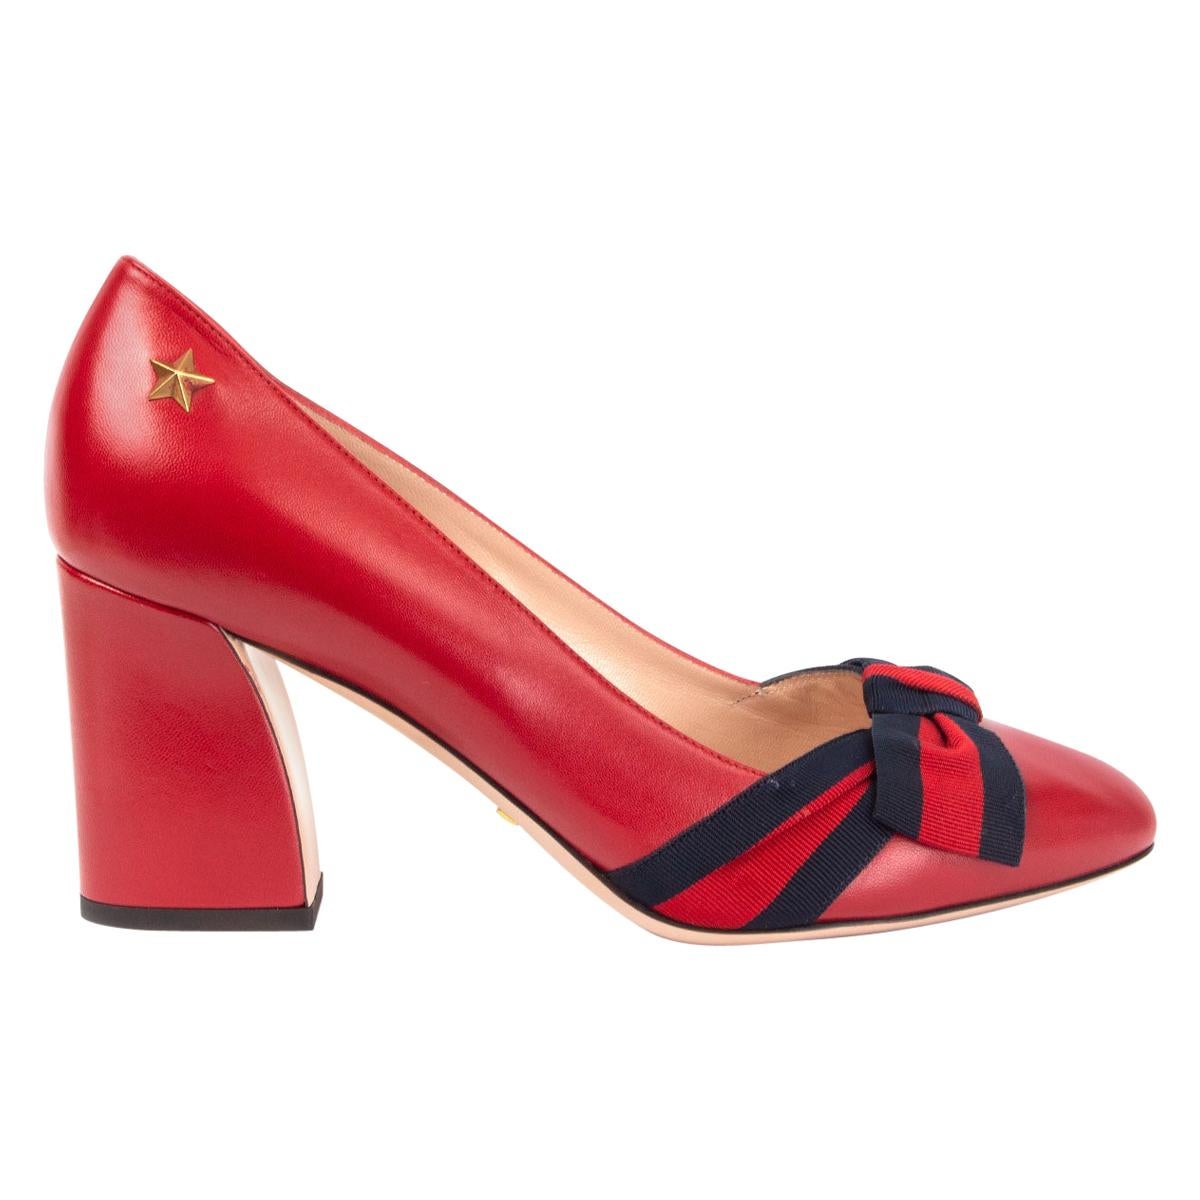 GUCCI red leather ALINE BLOCK HEEL Pumps Shoes 39